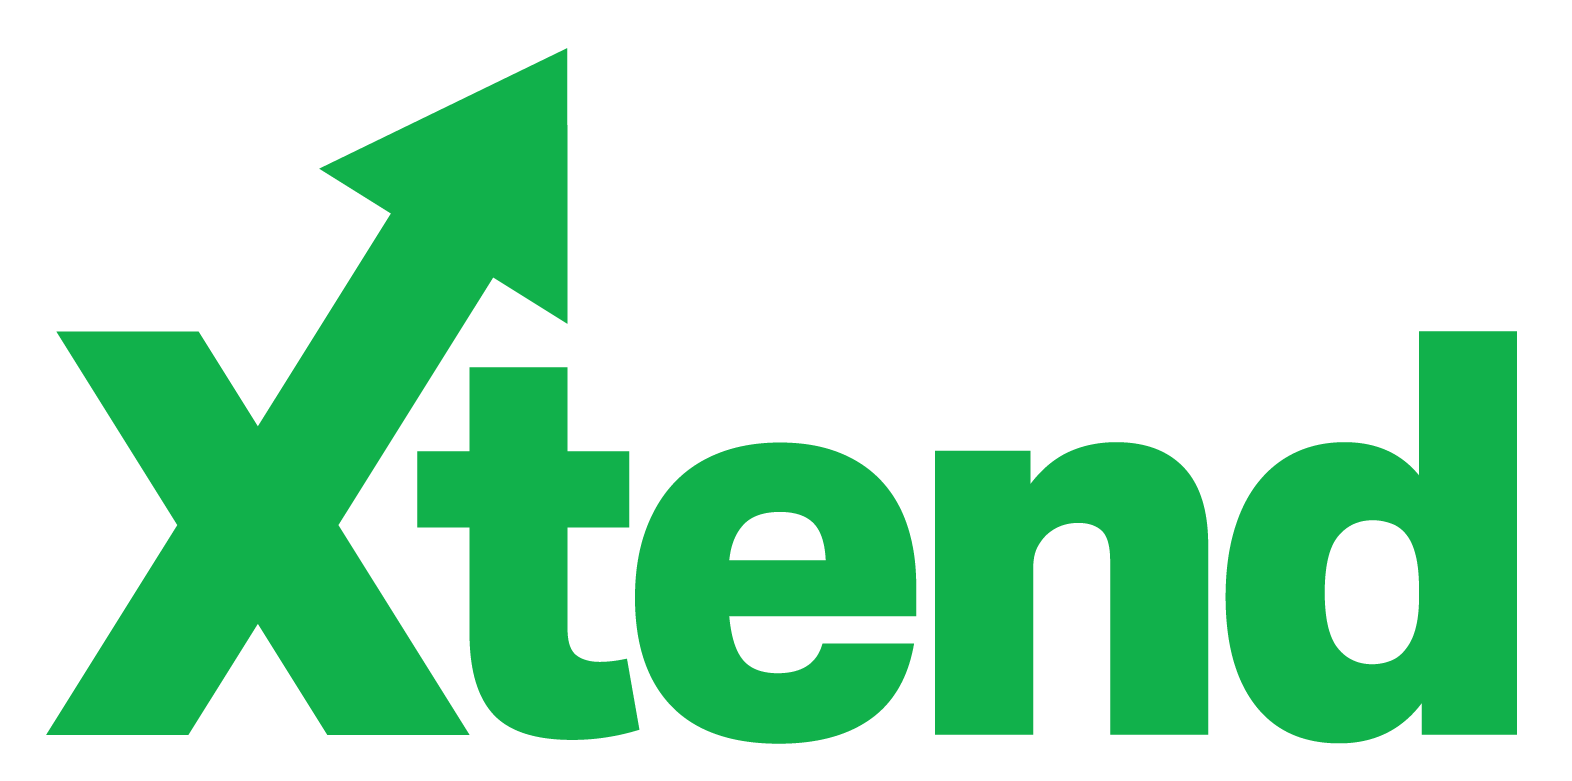 Green logo stating the word Xtend, the name of a network of ATMS used by credit unions.